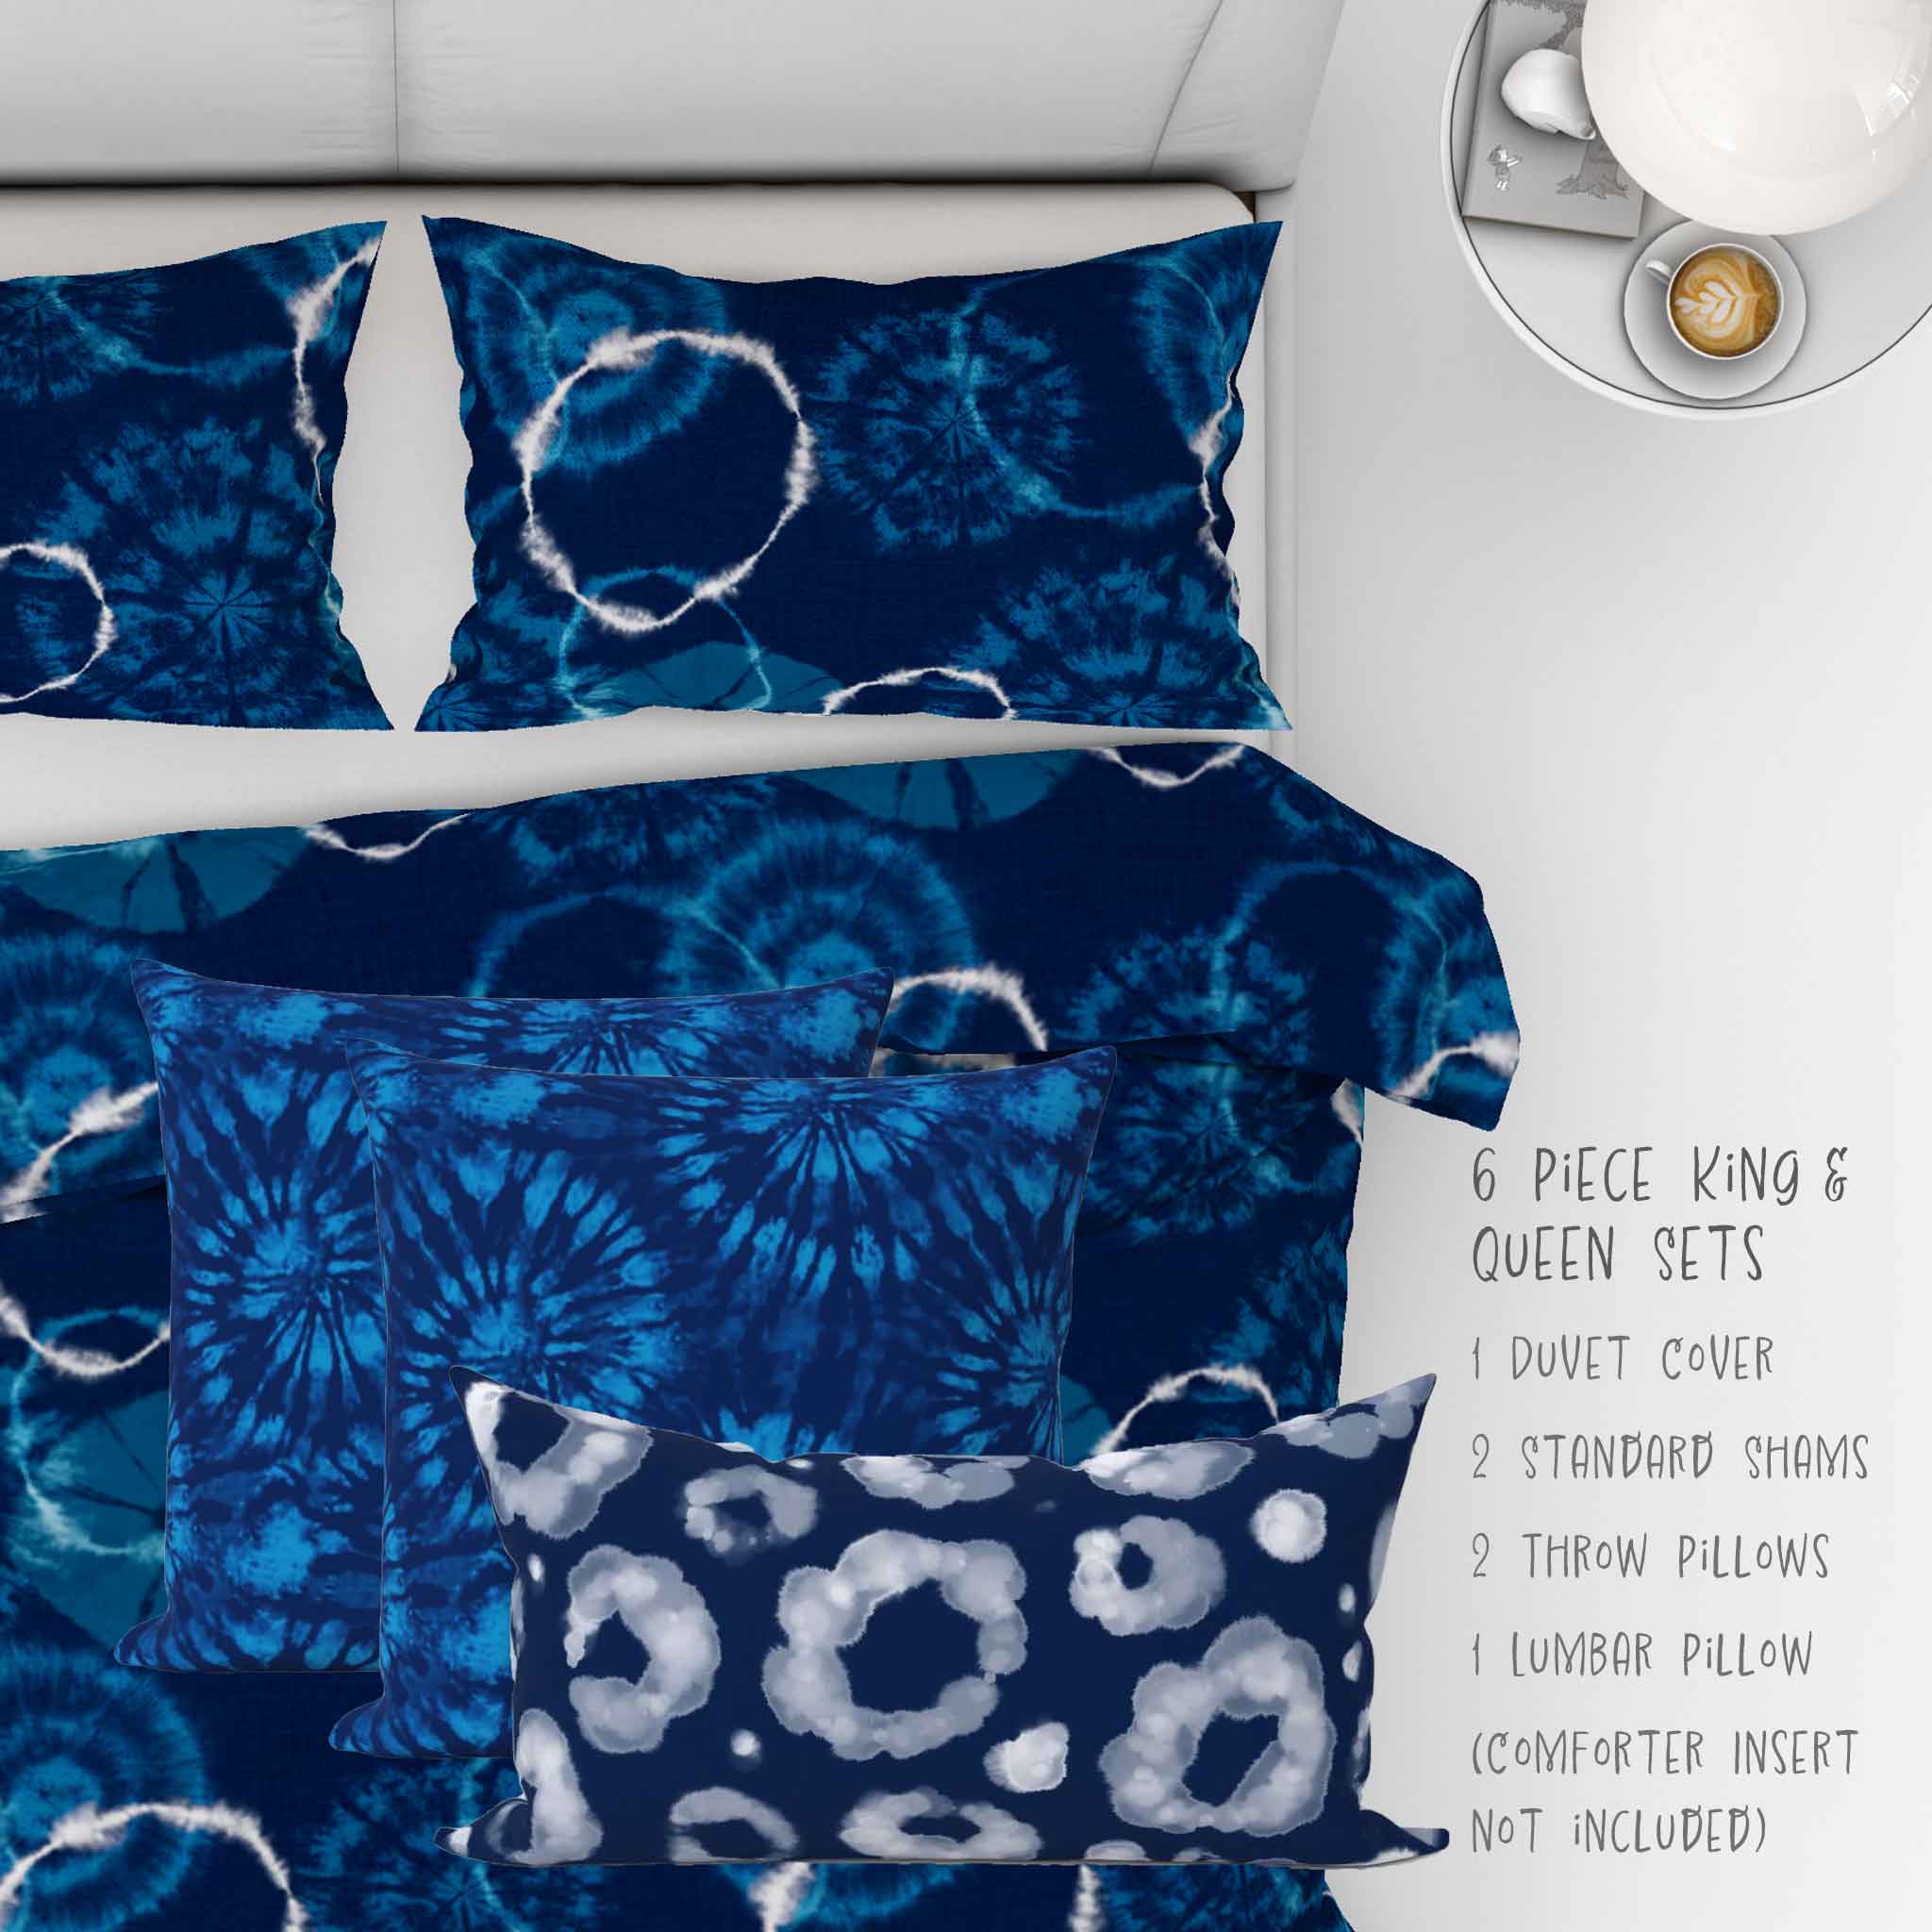 6 piece Shibori Indigo Tie Dye Dream pattern. Available in full/queen, king/cal. king sizes. Your order arrives with duvet cover, two shams, two 18 inch throw pillows and one lumbar pillow.